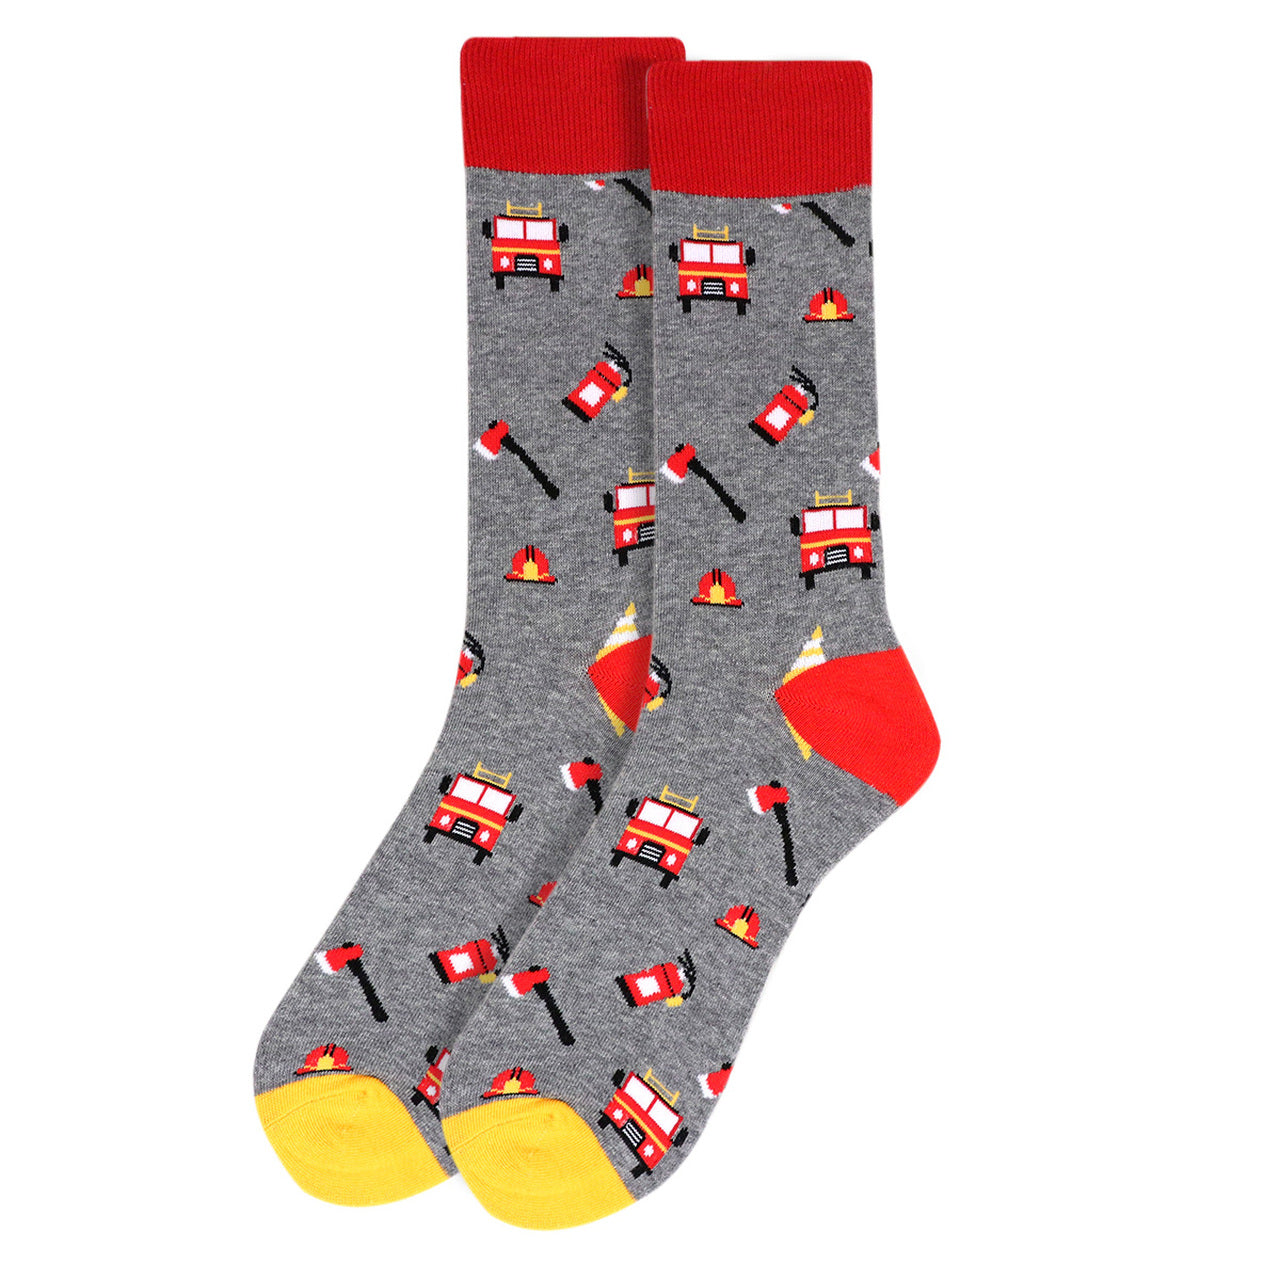 Fun Socks Men's Firefighter Novelty Socks Grey and Red with Yellow Fireman Gift for Dad Firemen Socks